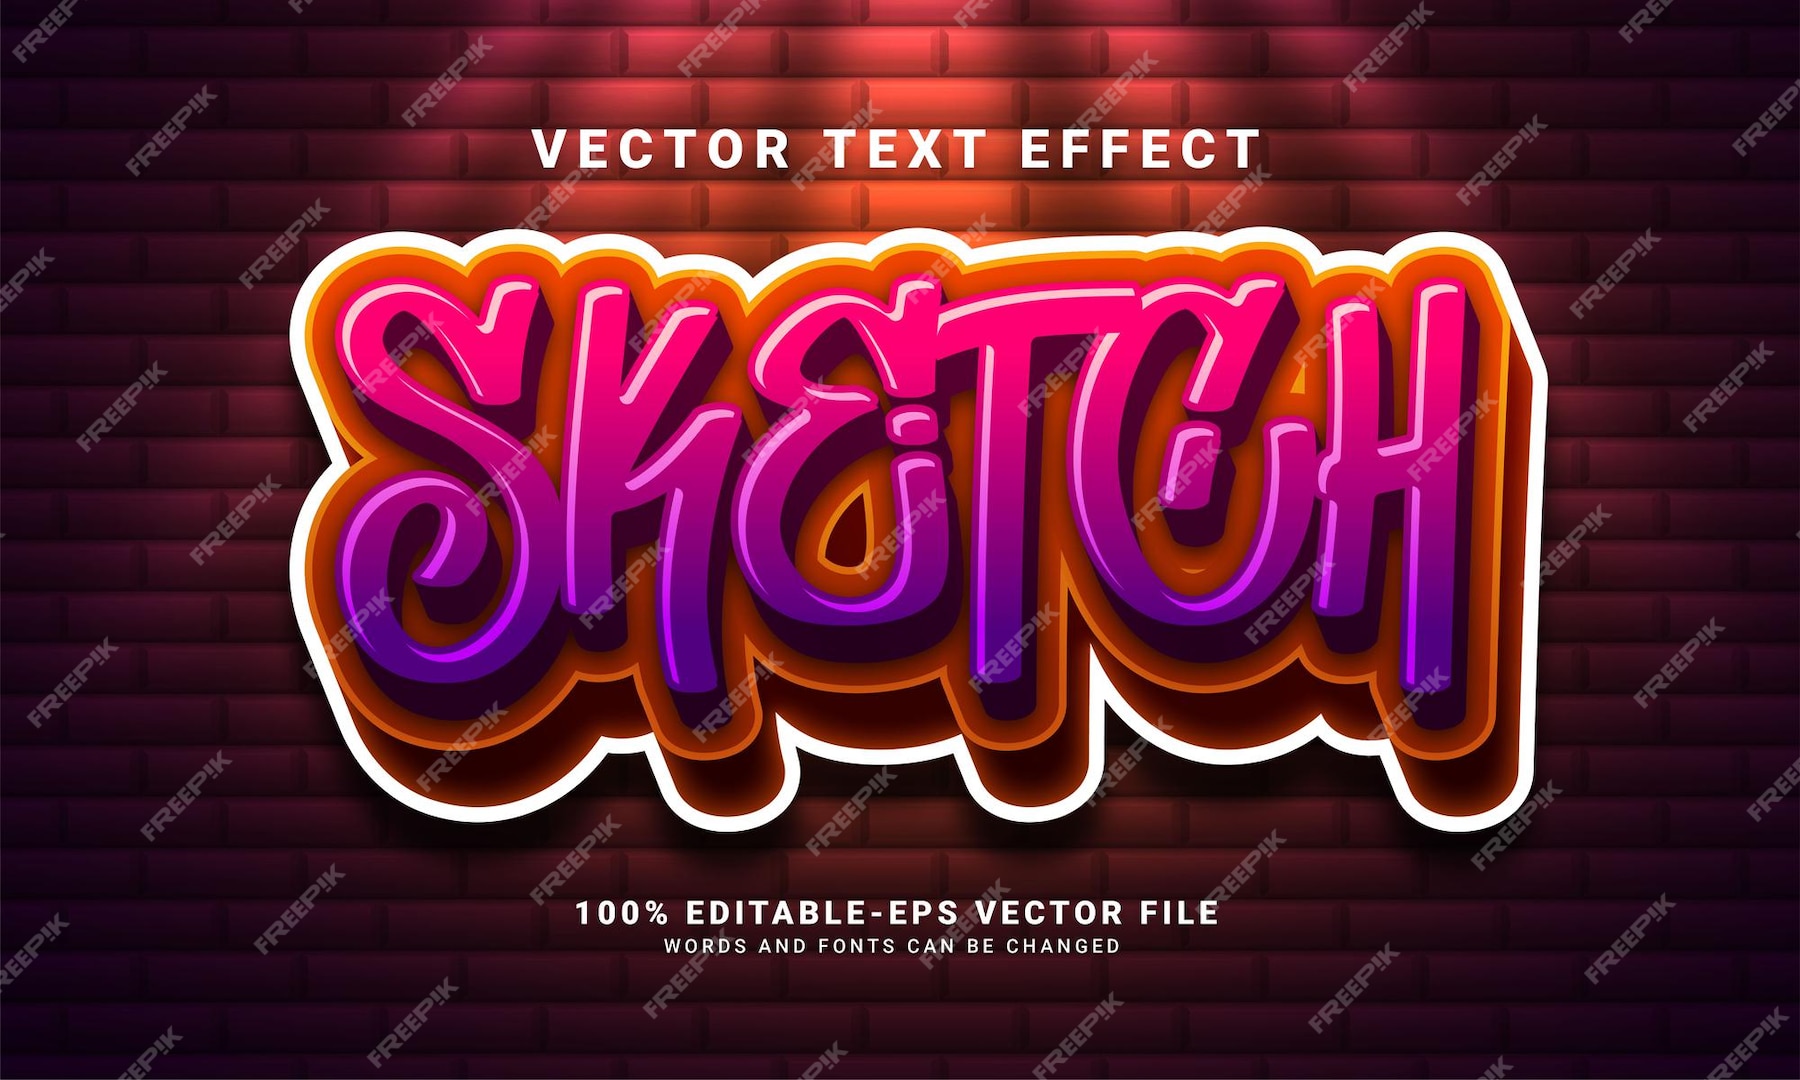 Premium Vector | Sketch 3d text effect, editable graffiti and colorful ...